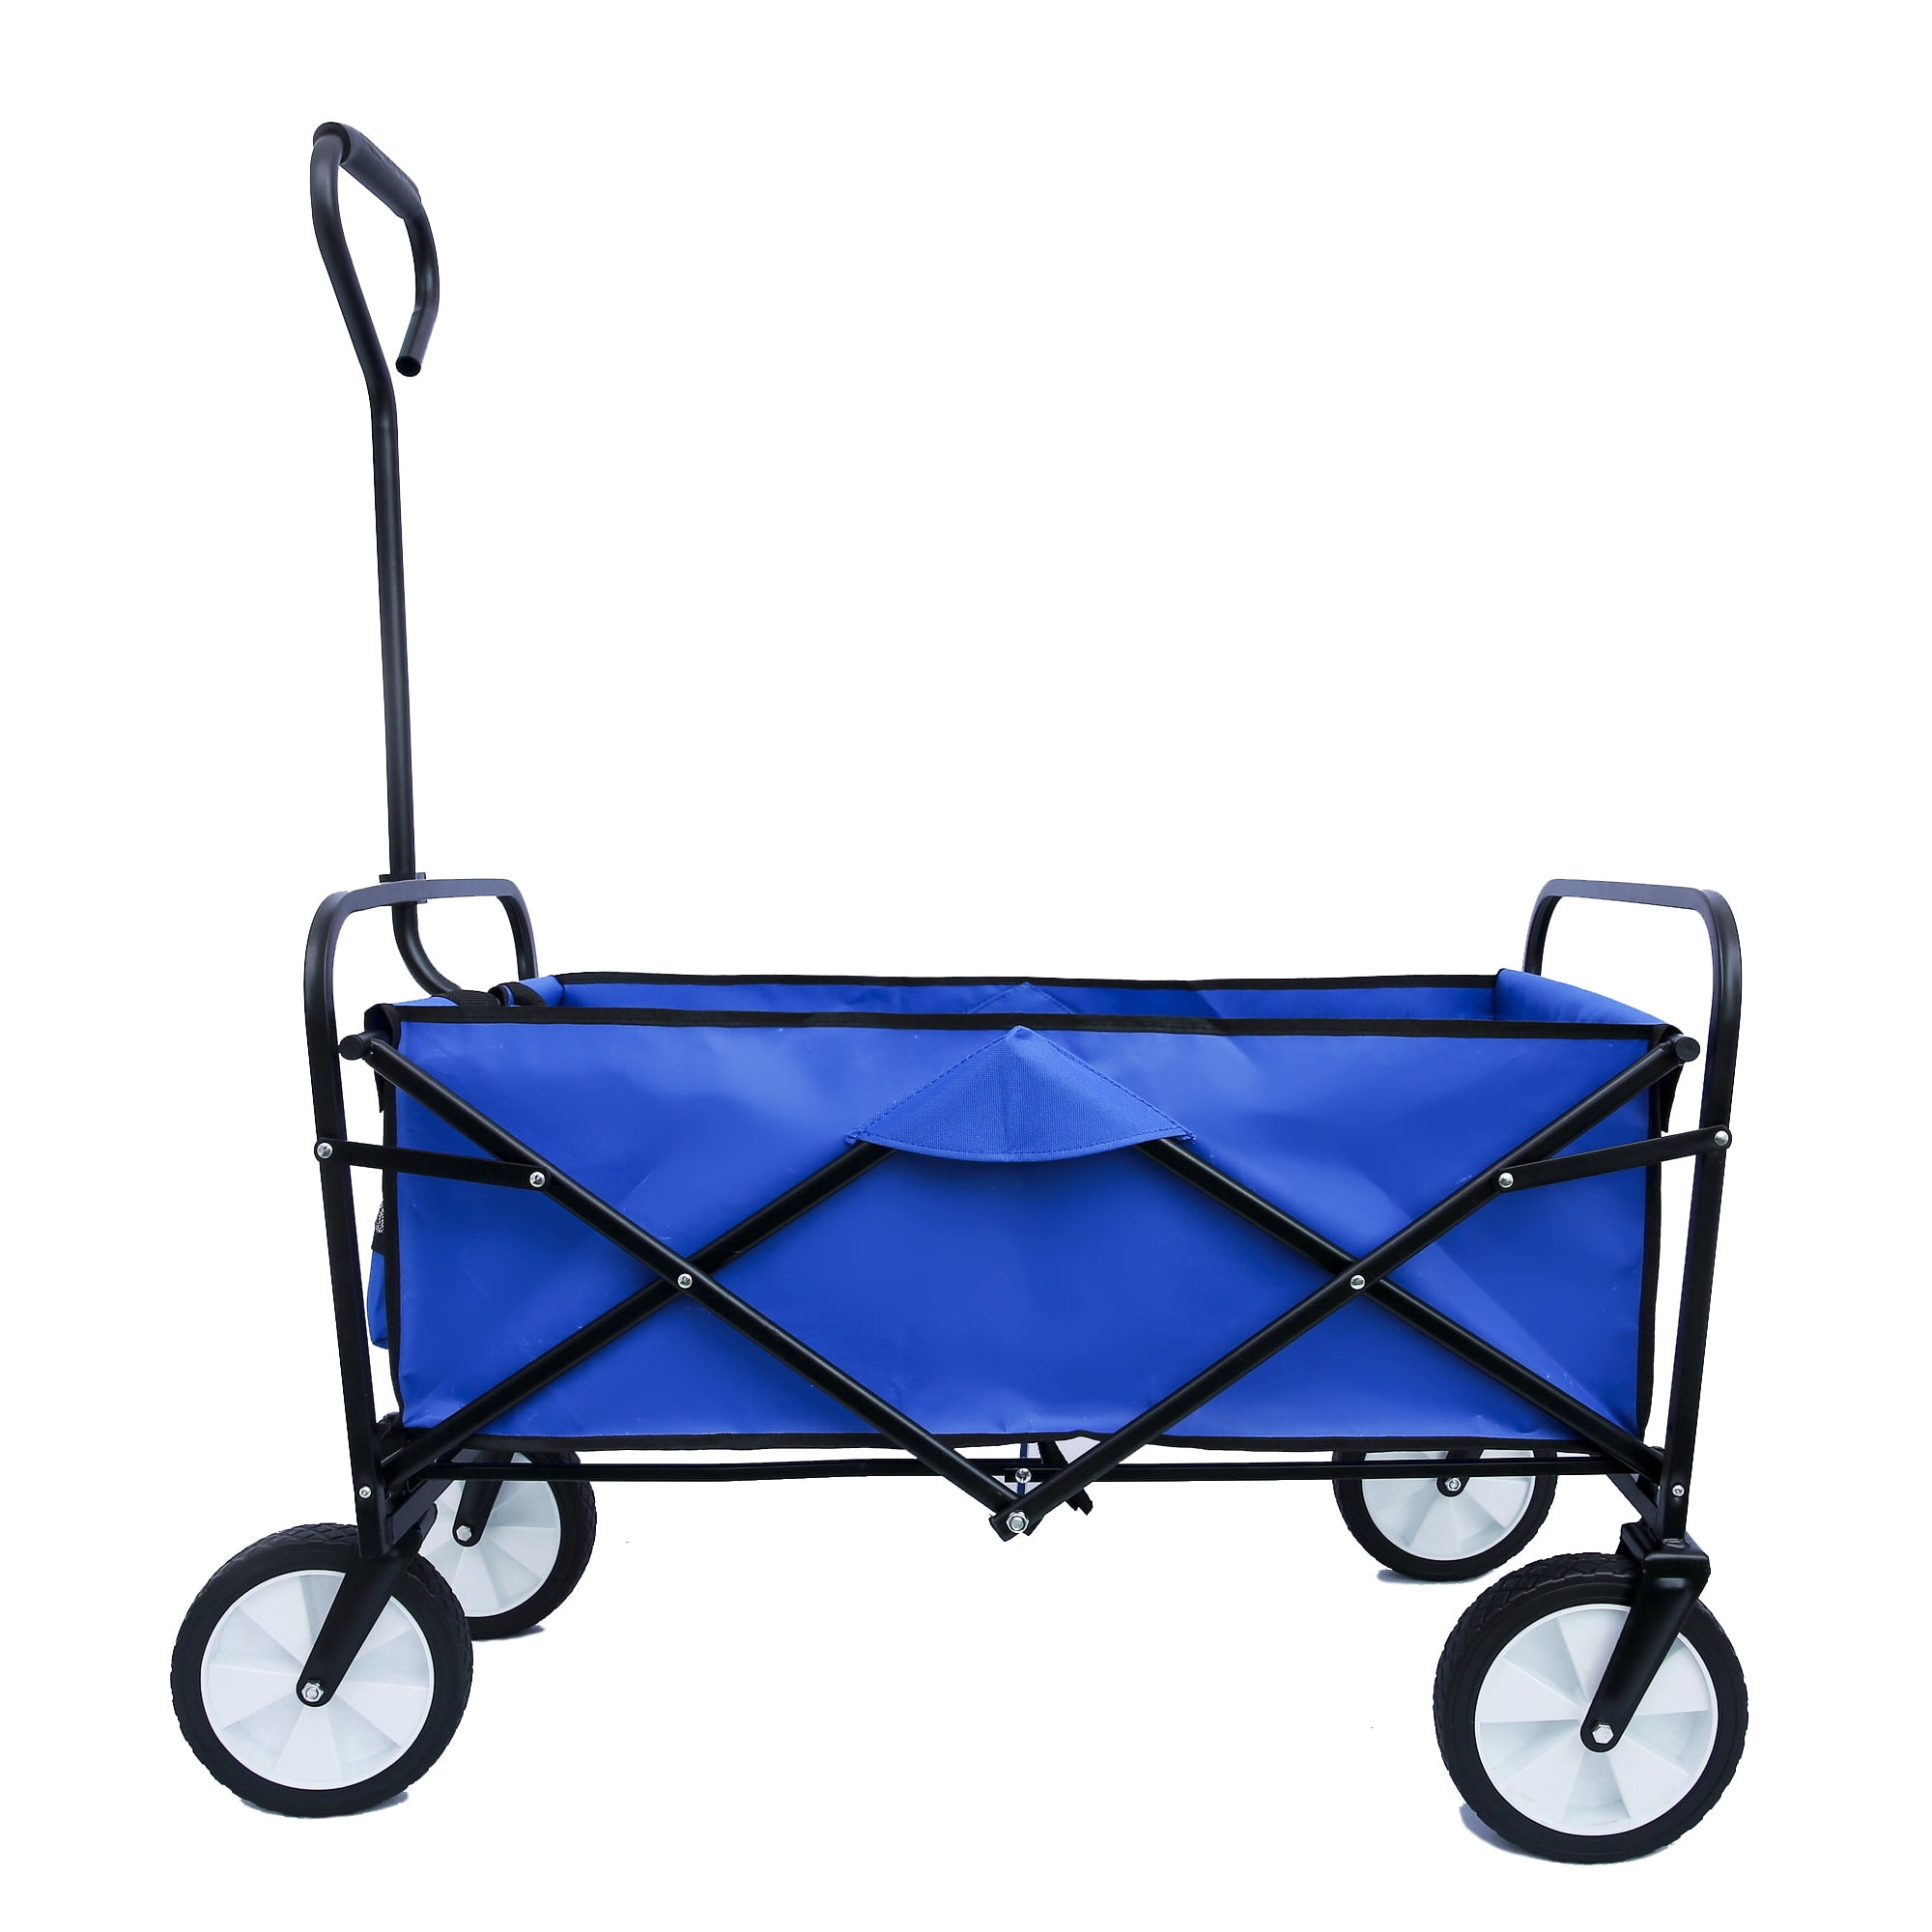 Double Fabric Rubber Wheels W/Brake and Drink Holder SNAN Collapsible Utility Wagon Heavy Duty Folding Outdoor Garden Cart Picnic Sports Suit for Garden Blue Camping Adjustable Handles 